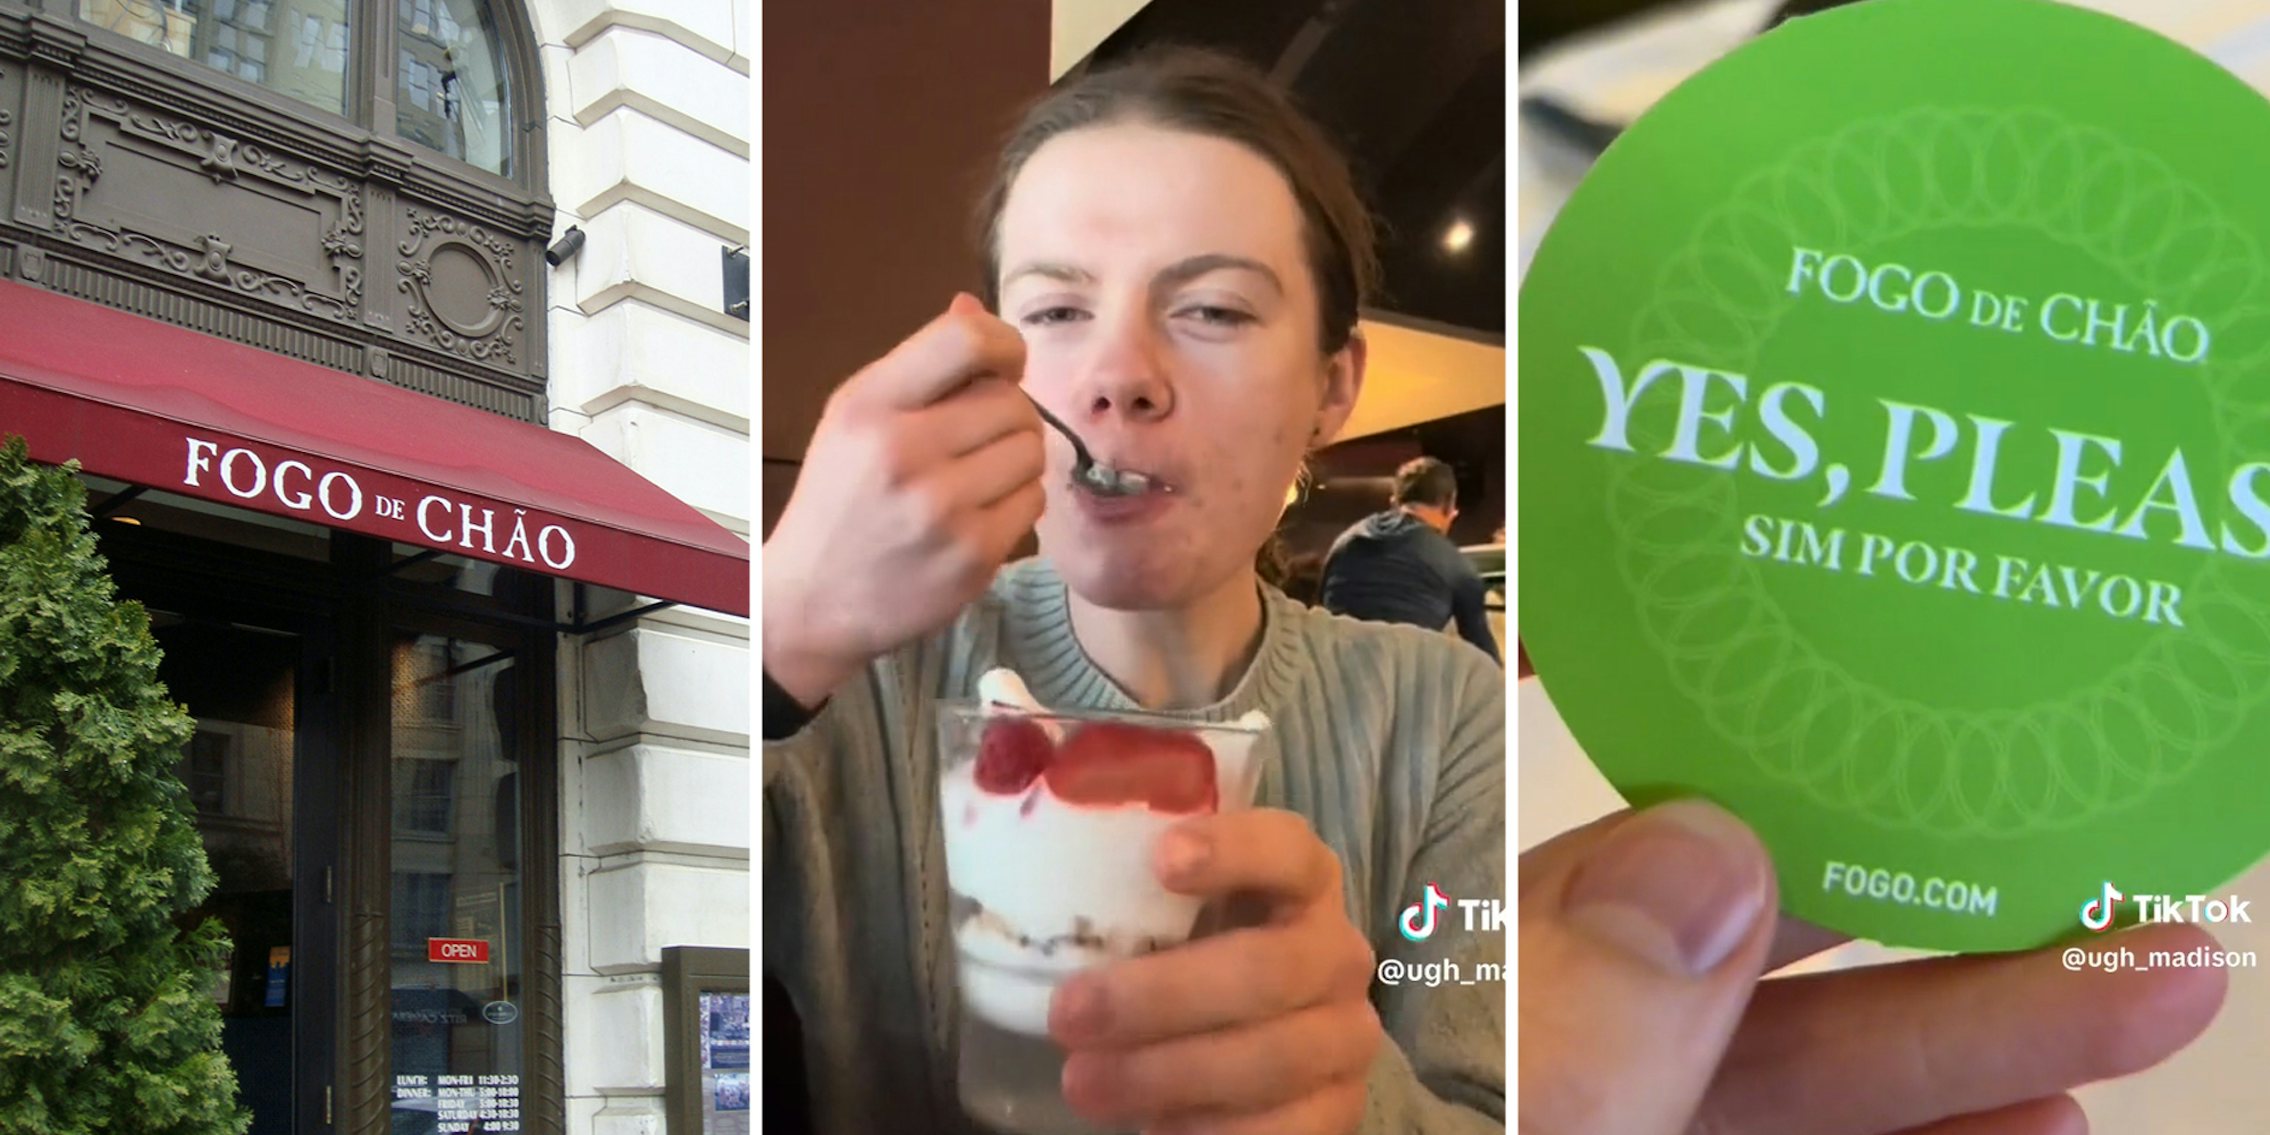 Fogo de Chao storefront(l), Woman eating parfait(c), Green coster(r)